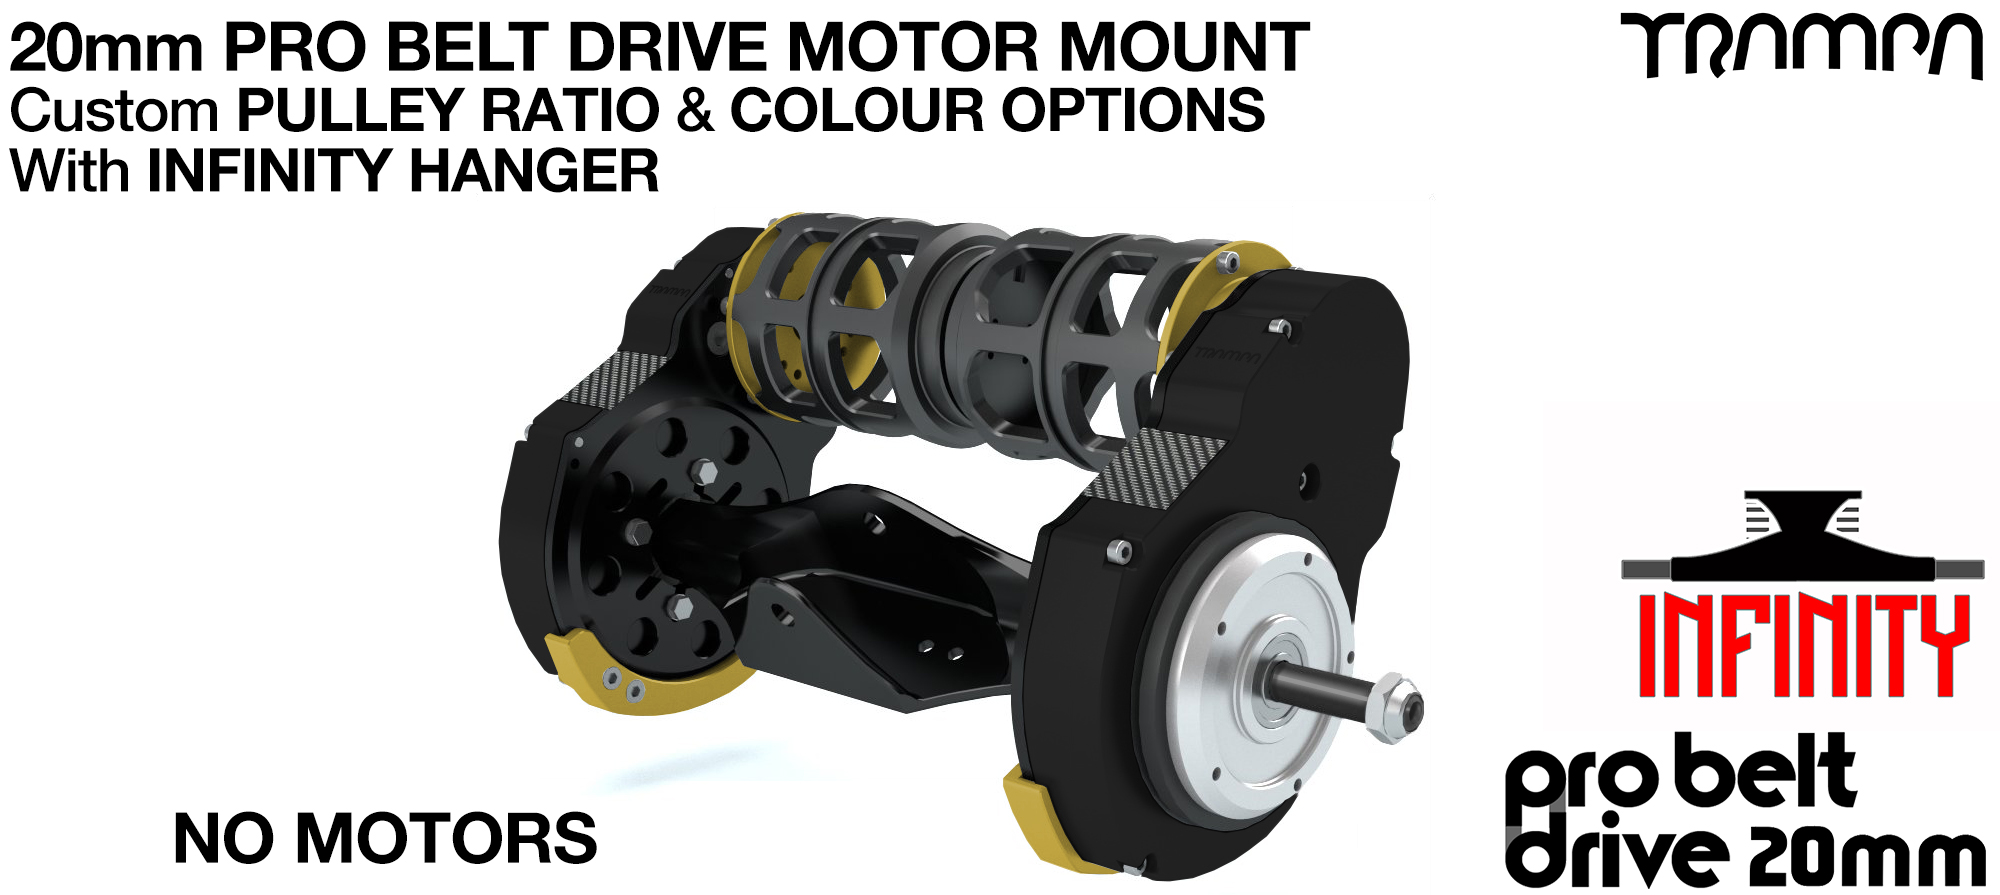 20mm PRO BELT DRIVE Motor Mounts with PULLEYS & FILTERS mounted with Hanger - NO Motors